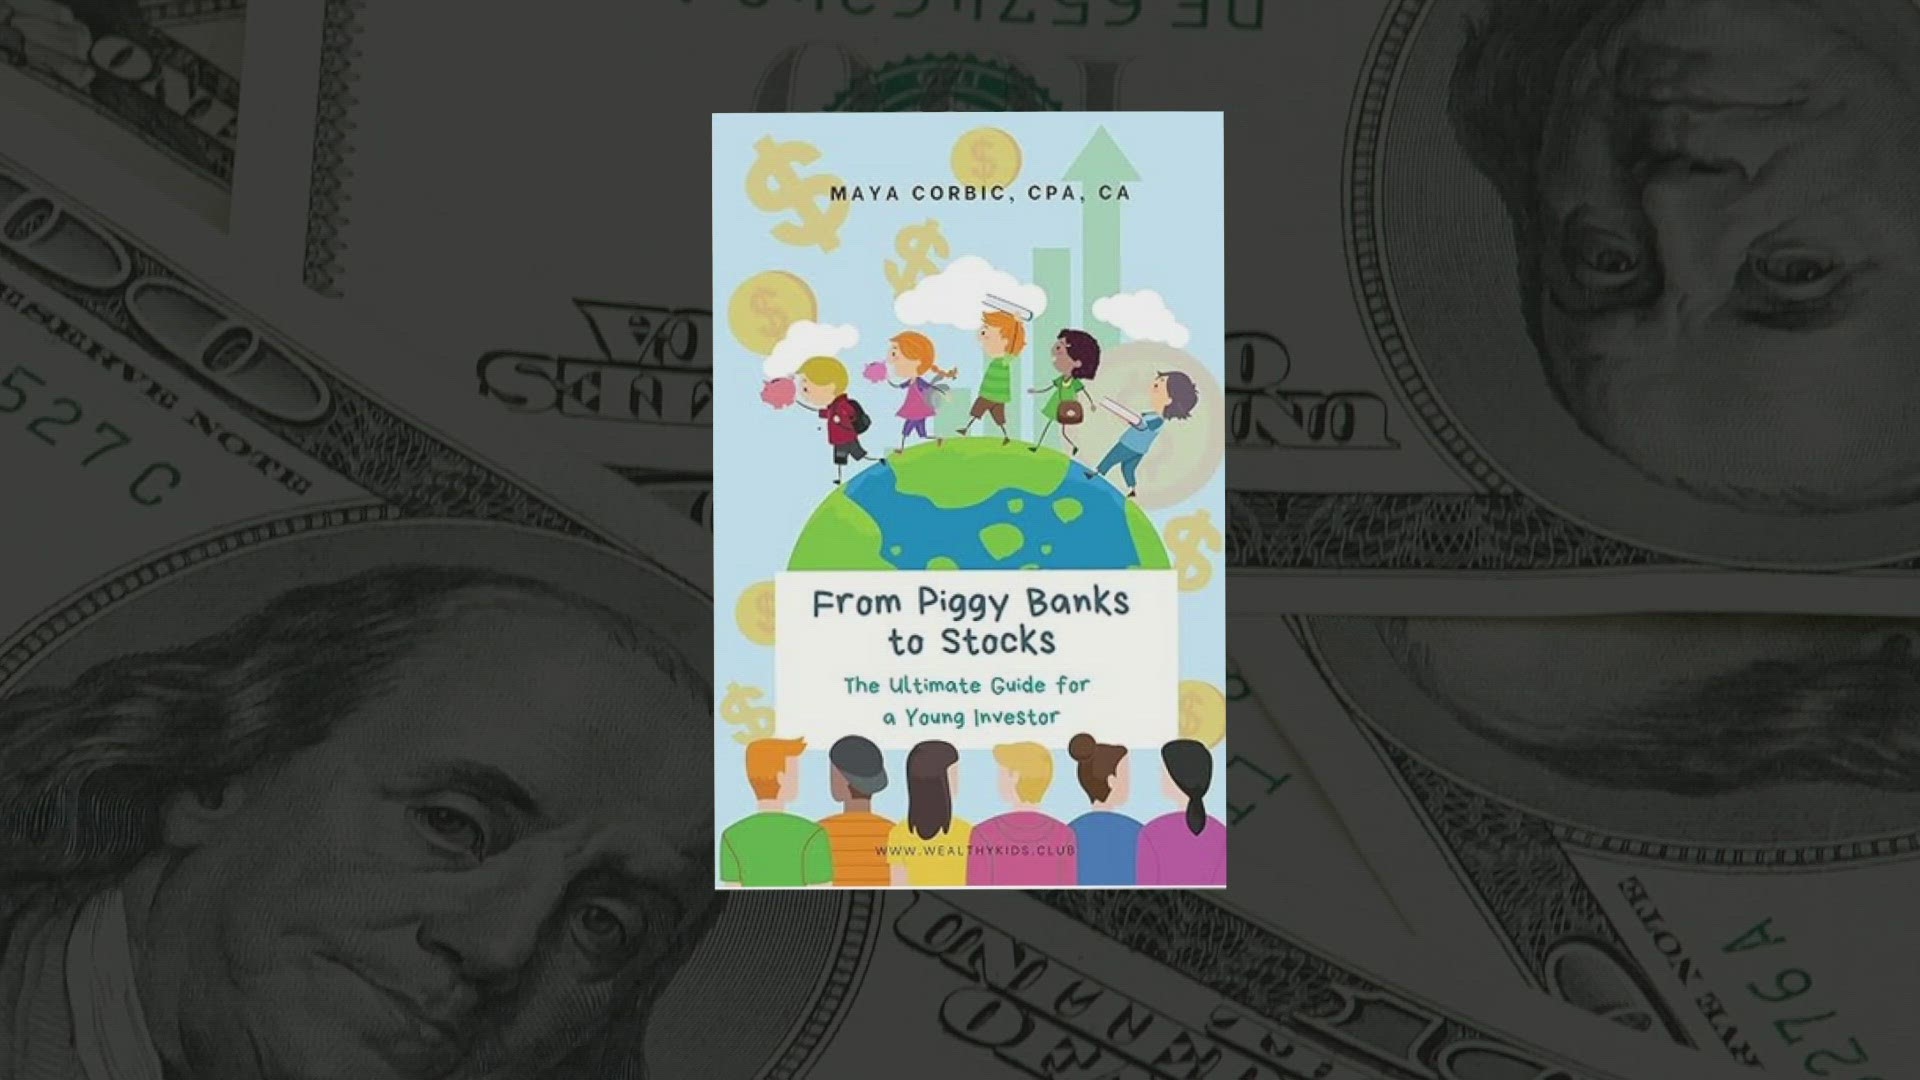 Maya Corbic wrote the book "From Piggy Banks to Stocks." She explains ways to train your kids to save money.